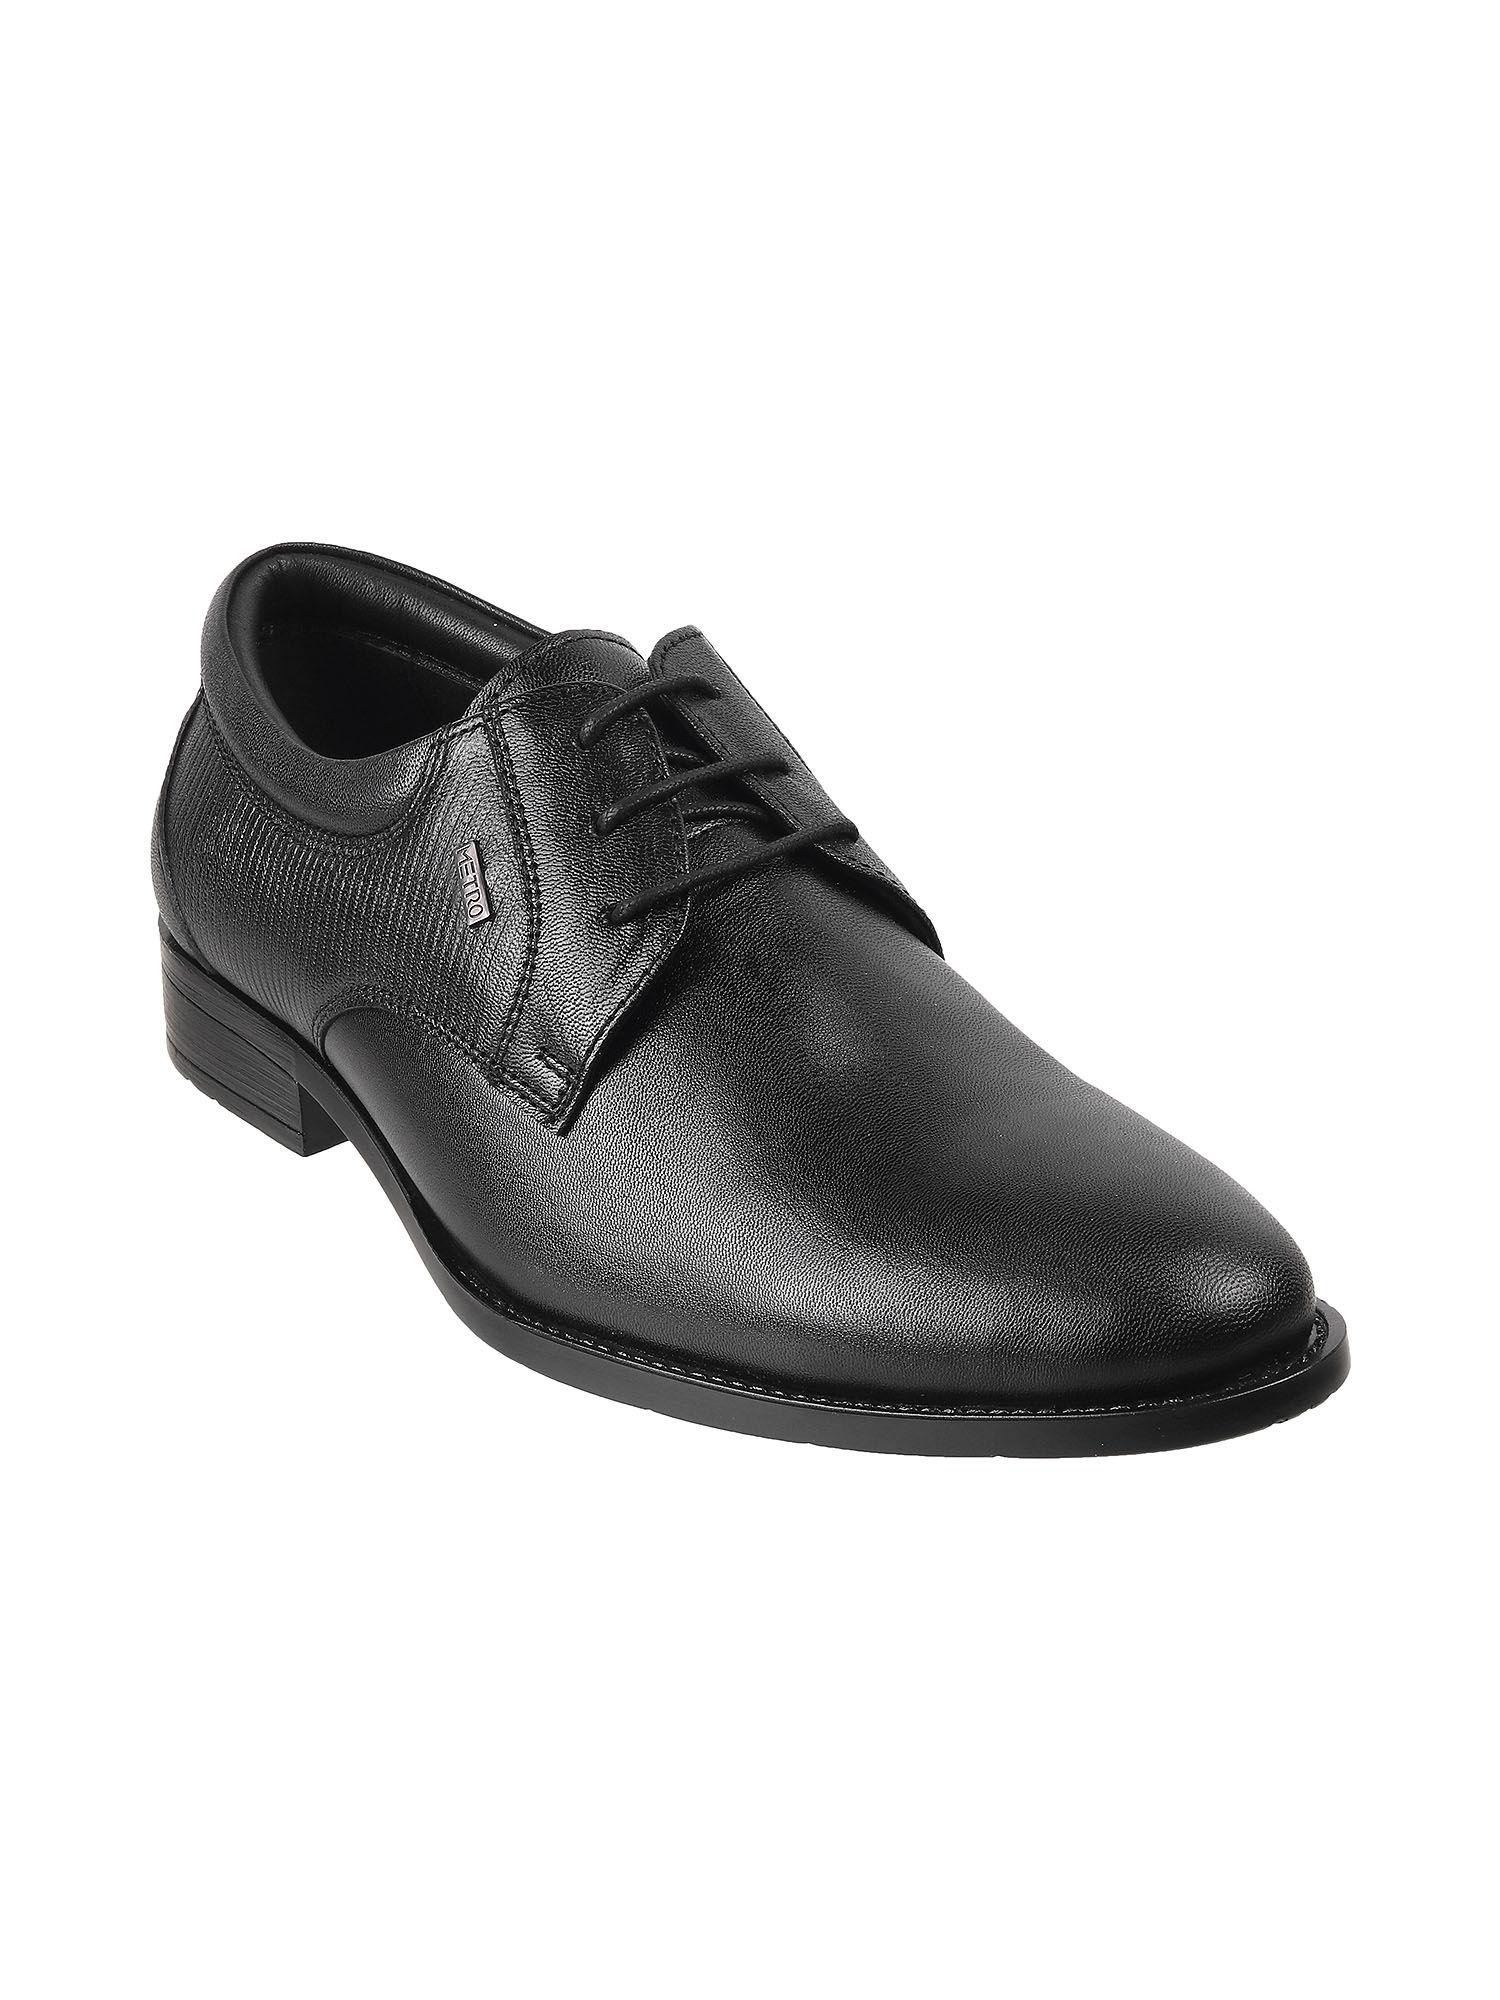 mens black formal lace-ups shoesmochi metro solid black lace-up shoes